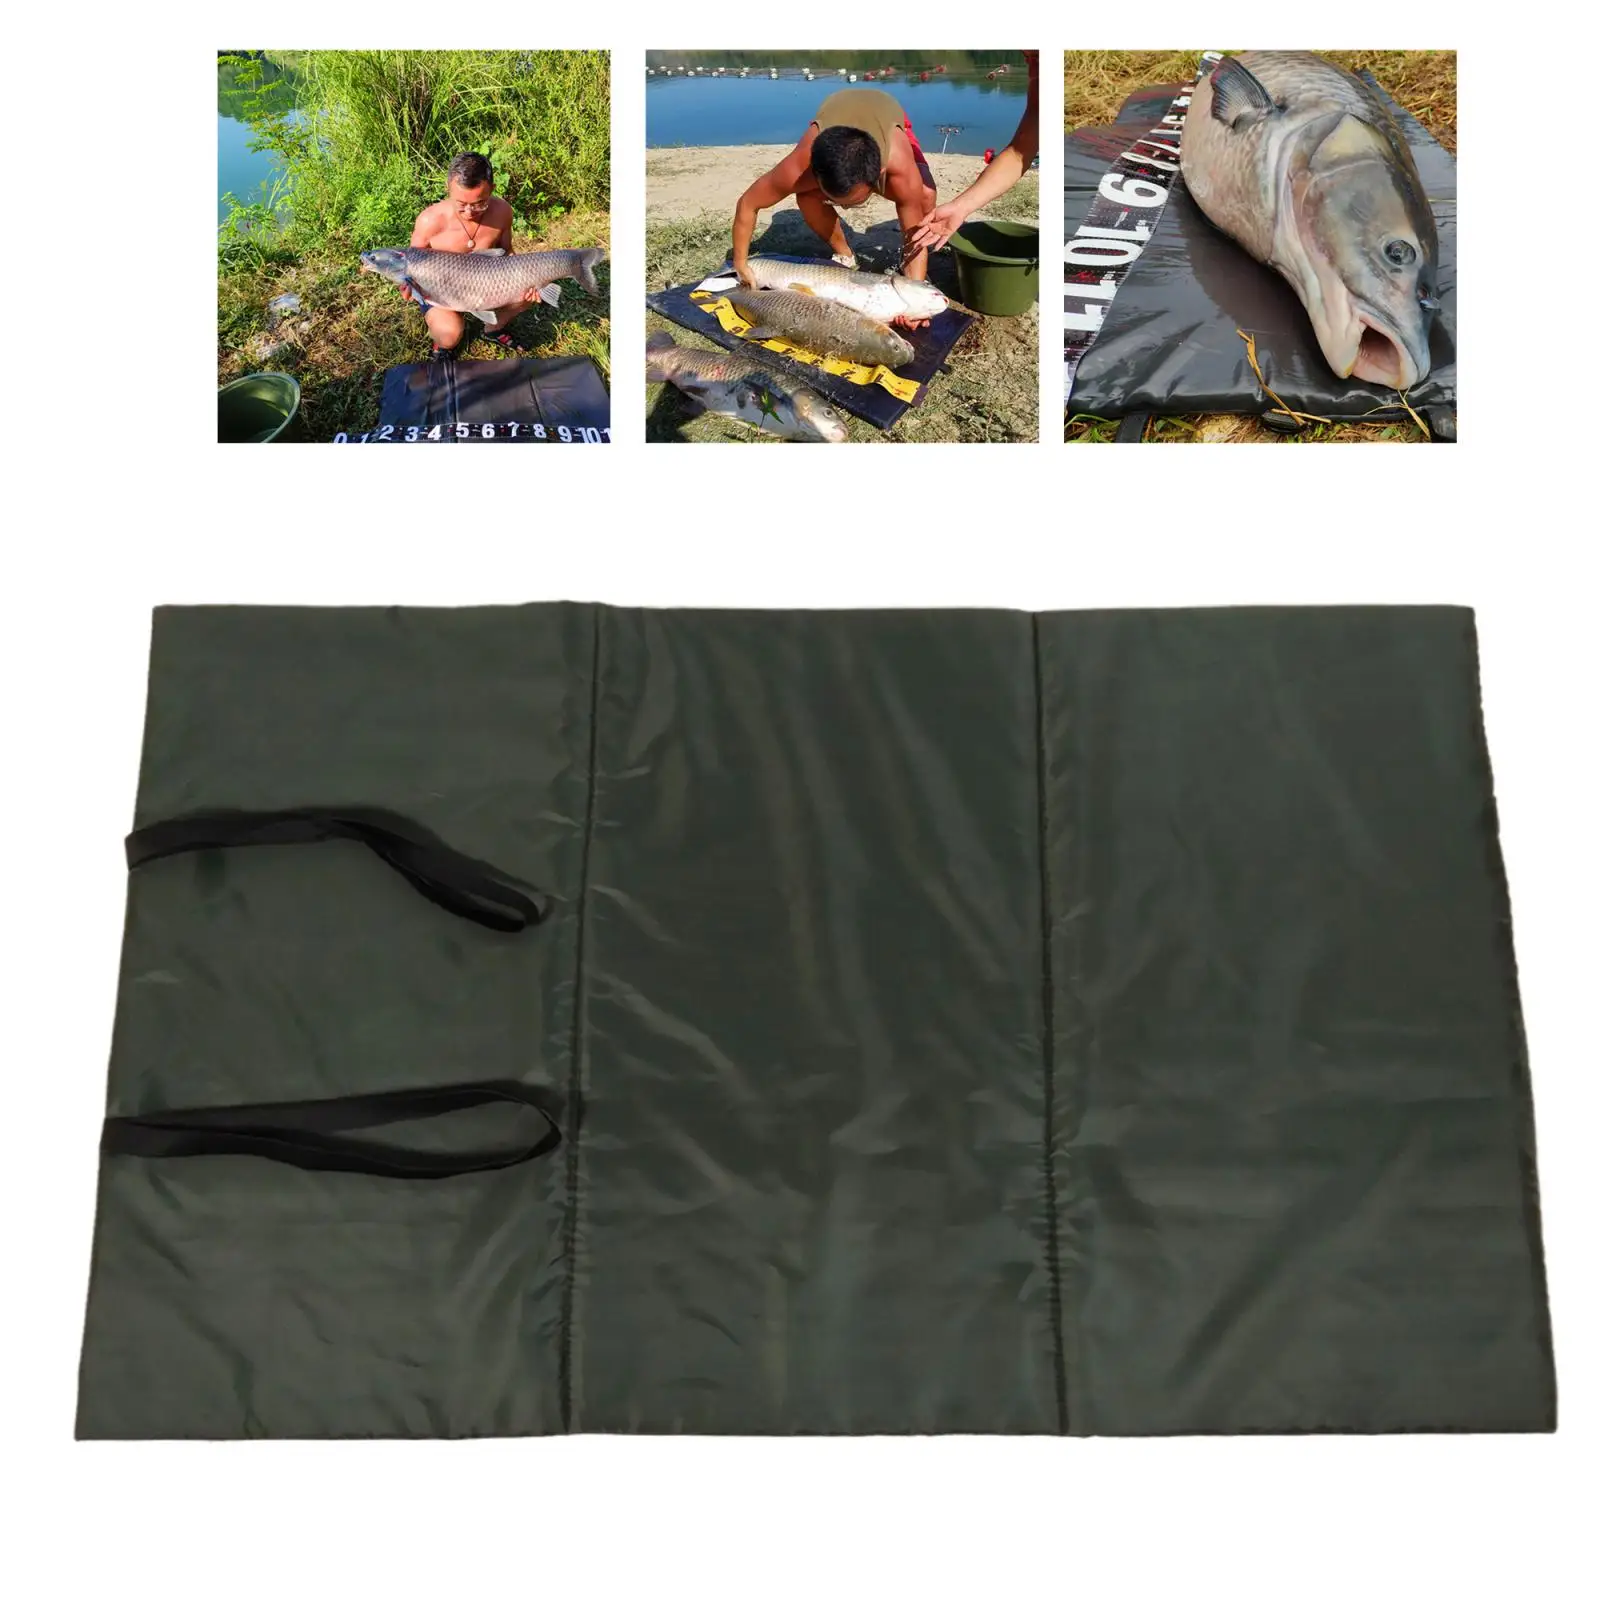 PADDED LARGE UNHOOKING MAT FOLD OVER STRAPS CARP FISHING TACKLE PROTECT PAD